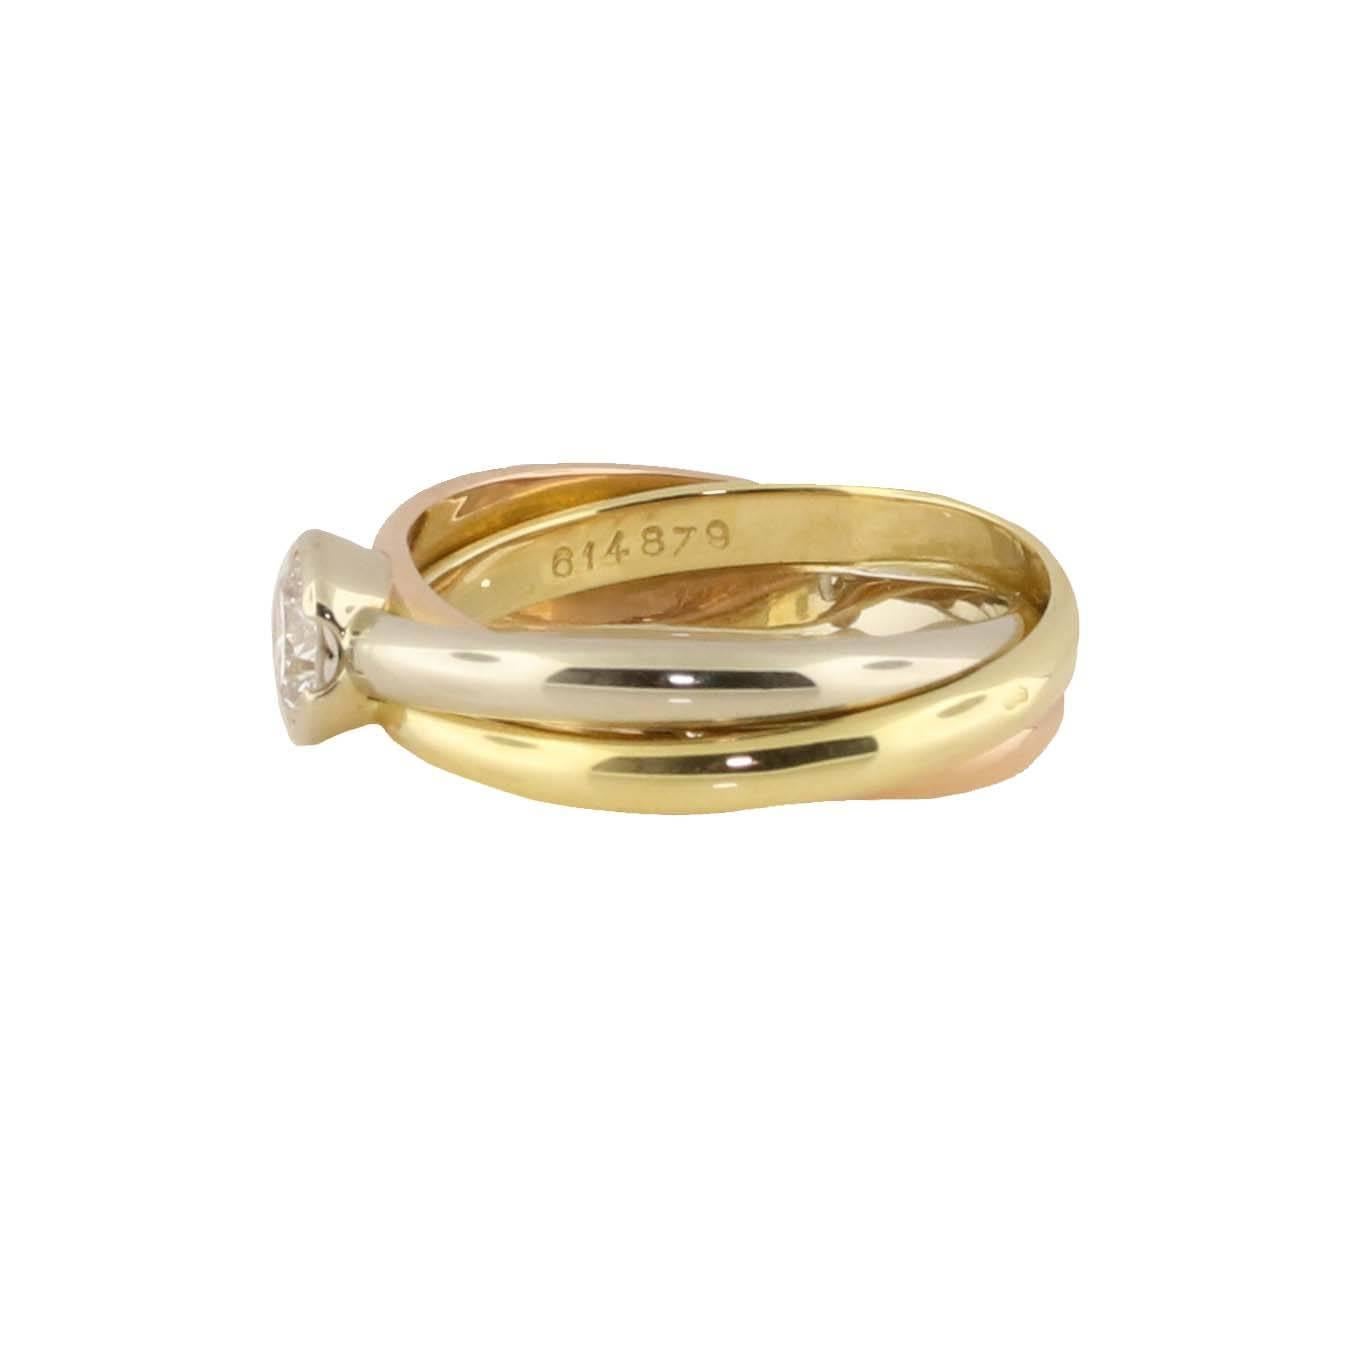 This ring is the definition of Cartier. It is classy, elegant and a true image of Cartier's fashion. This tri-colored rolling ring has the normal white, yellow and rose gold bands interlocking but is also adorned with a solitaire diamond. The size